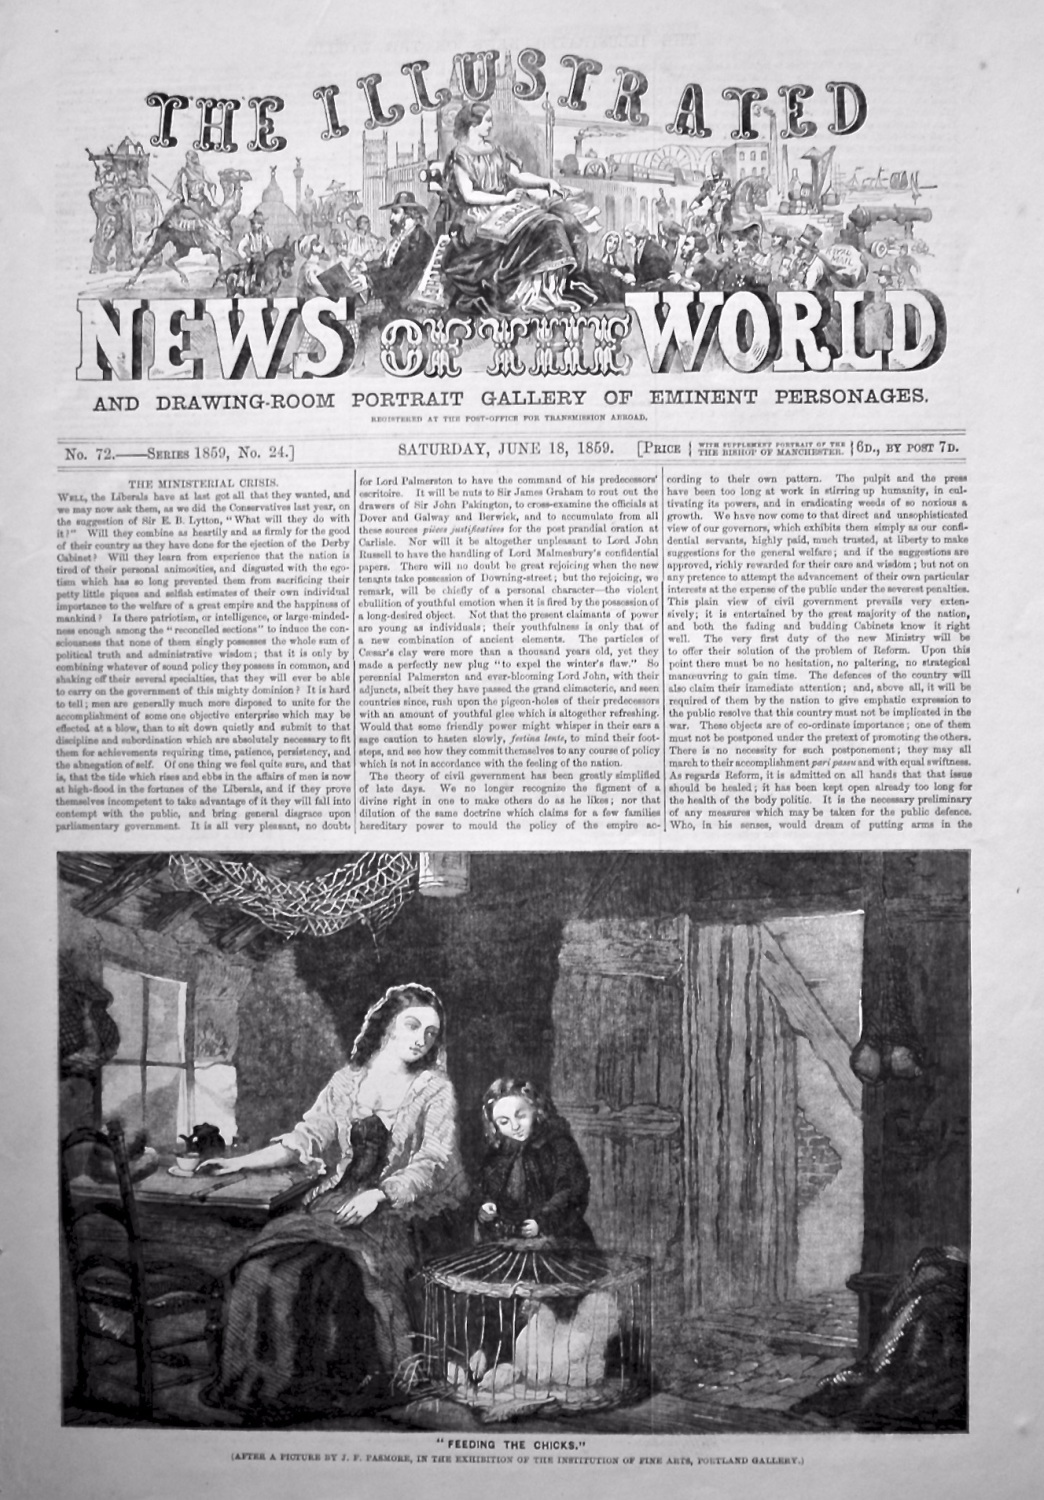 The Illustrated News of the World. June 18th, 1858.